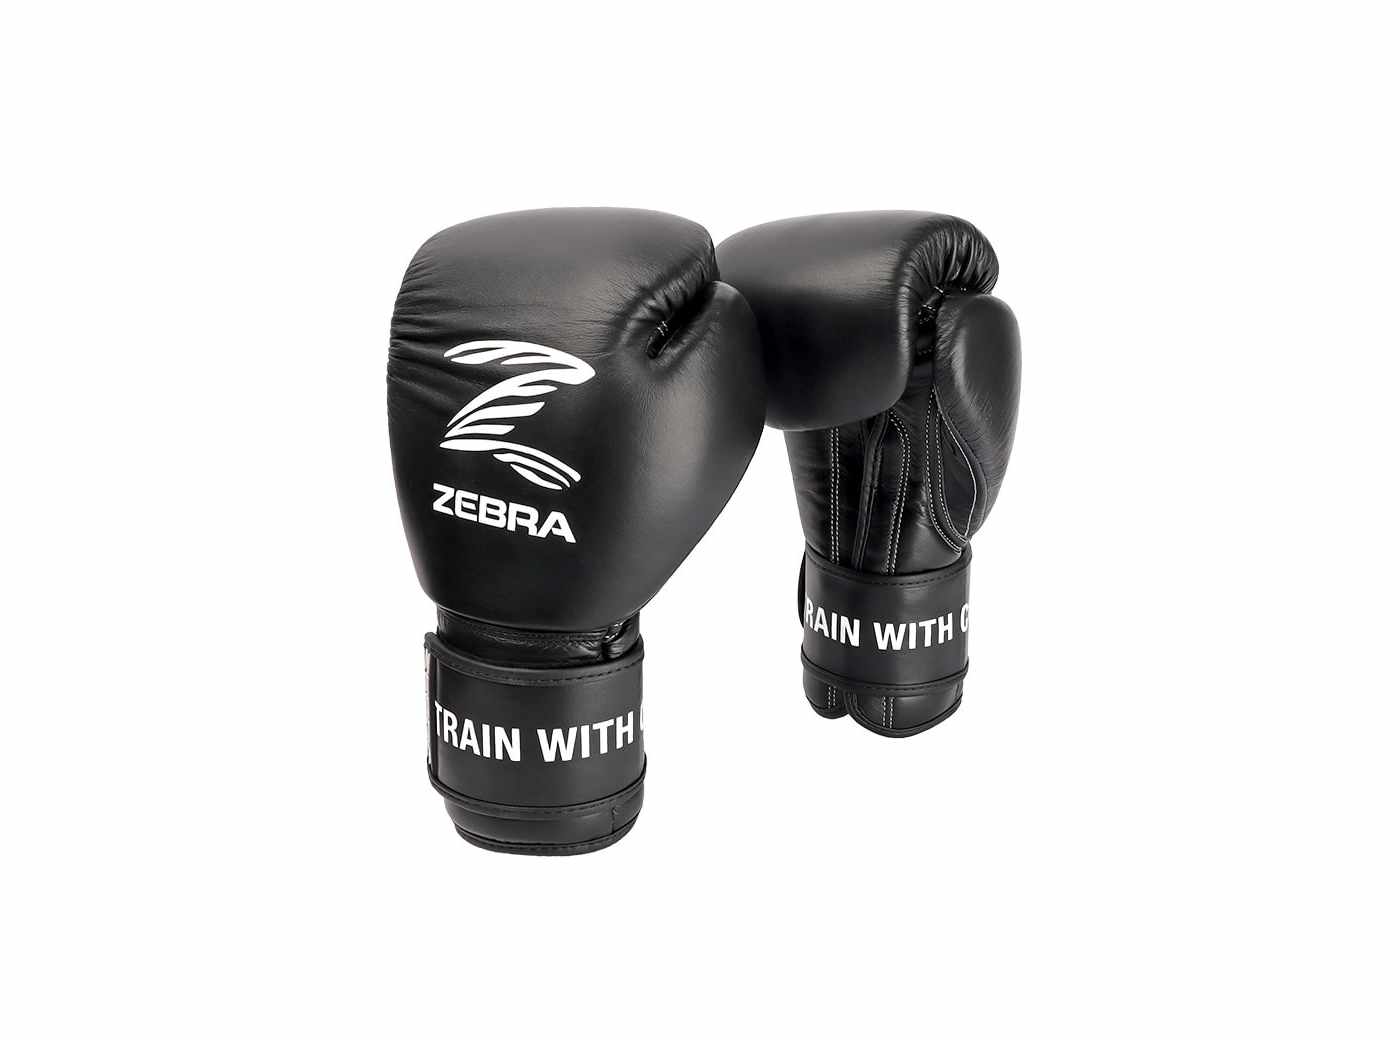 ZEBRA Pro Signature Hook and Loop Training Gloves front and back view